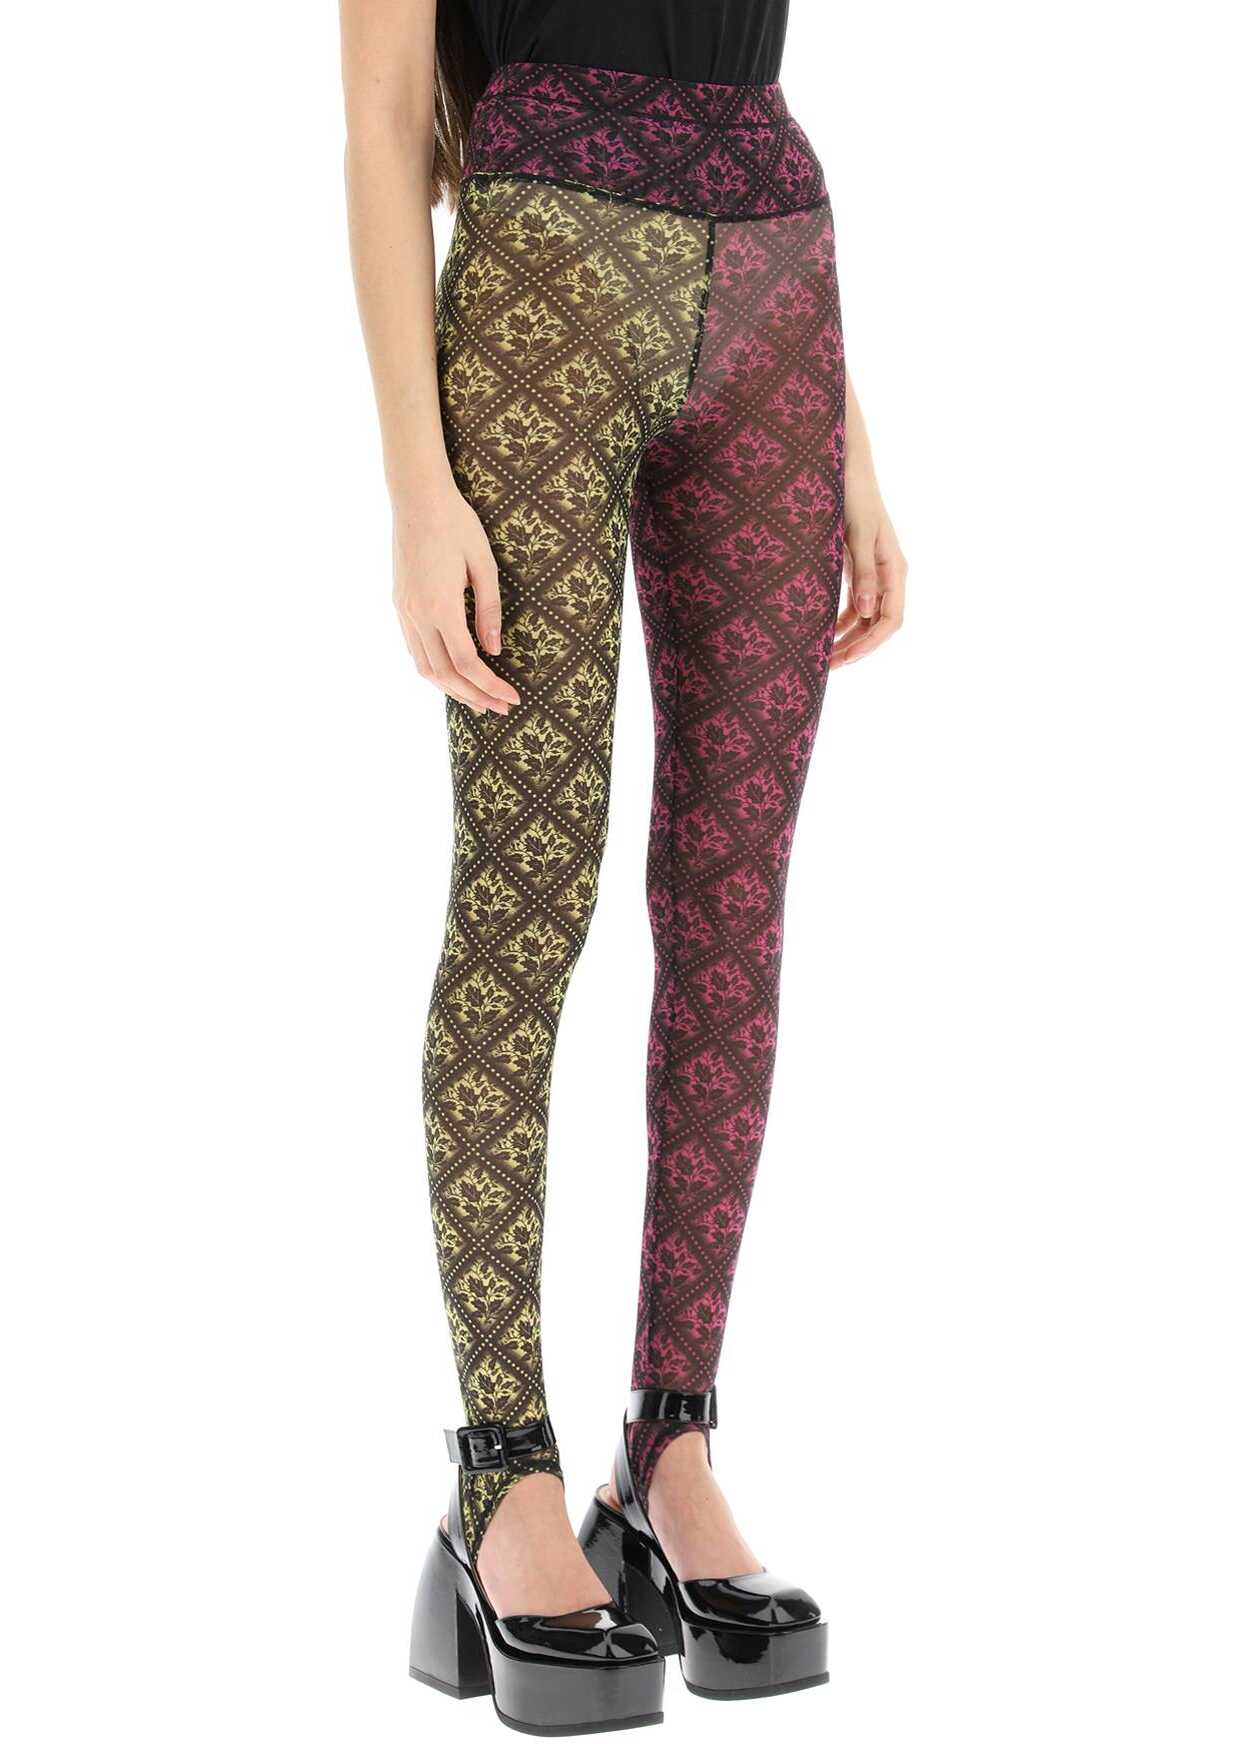 CHOPOVA LOWENA All-Over Printed Leggings PINK AND YELLOW